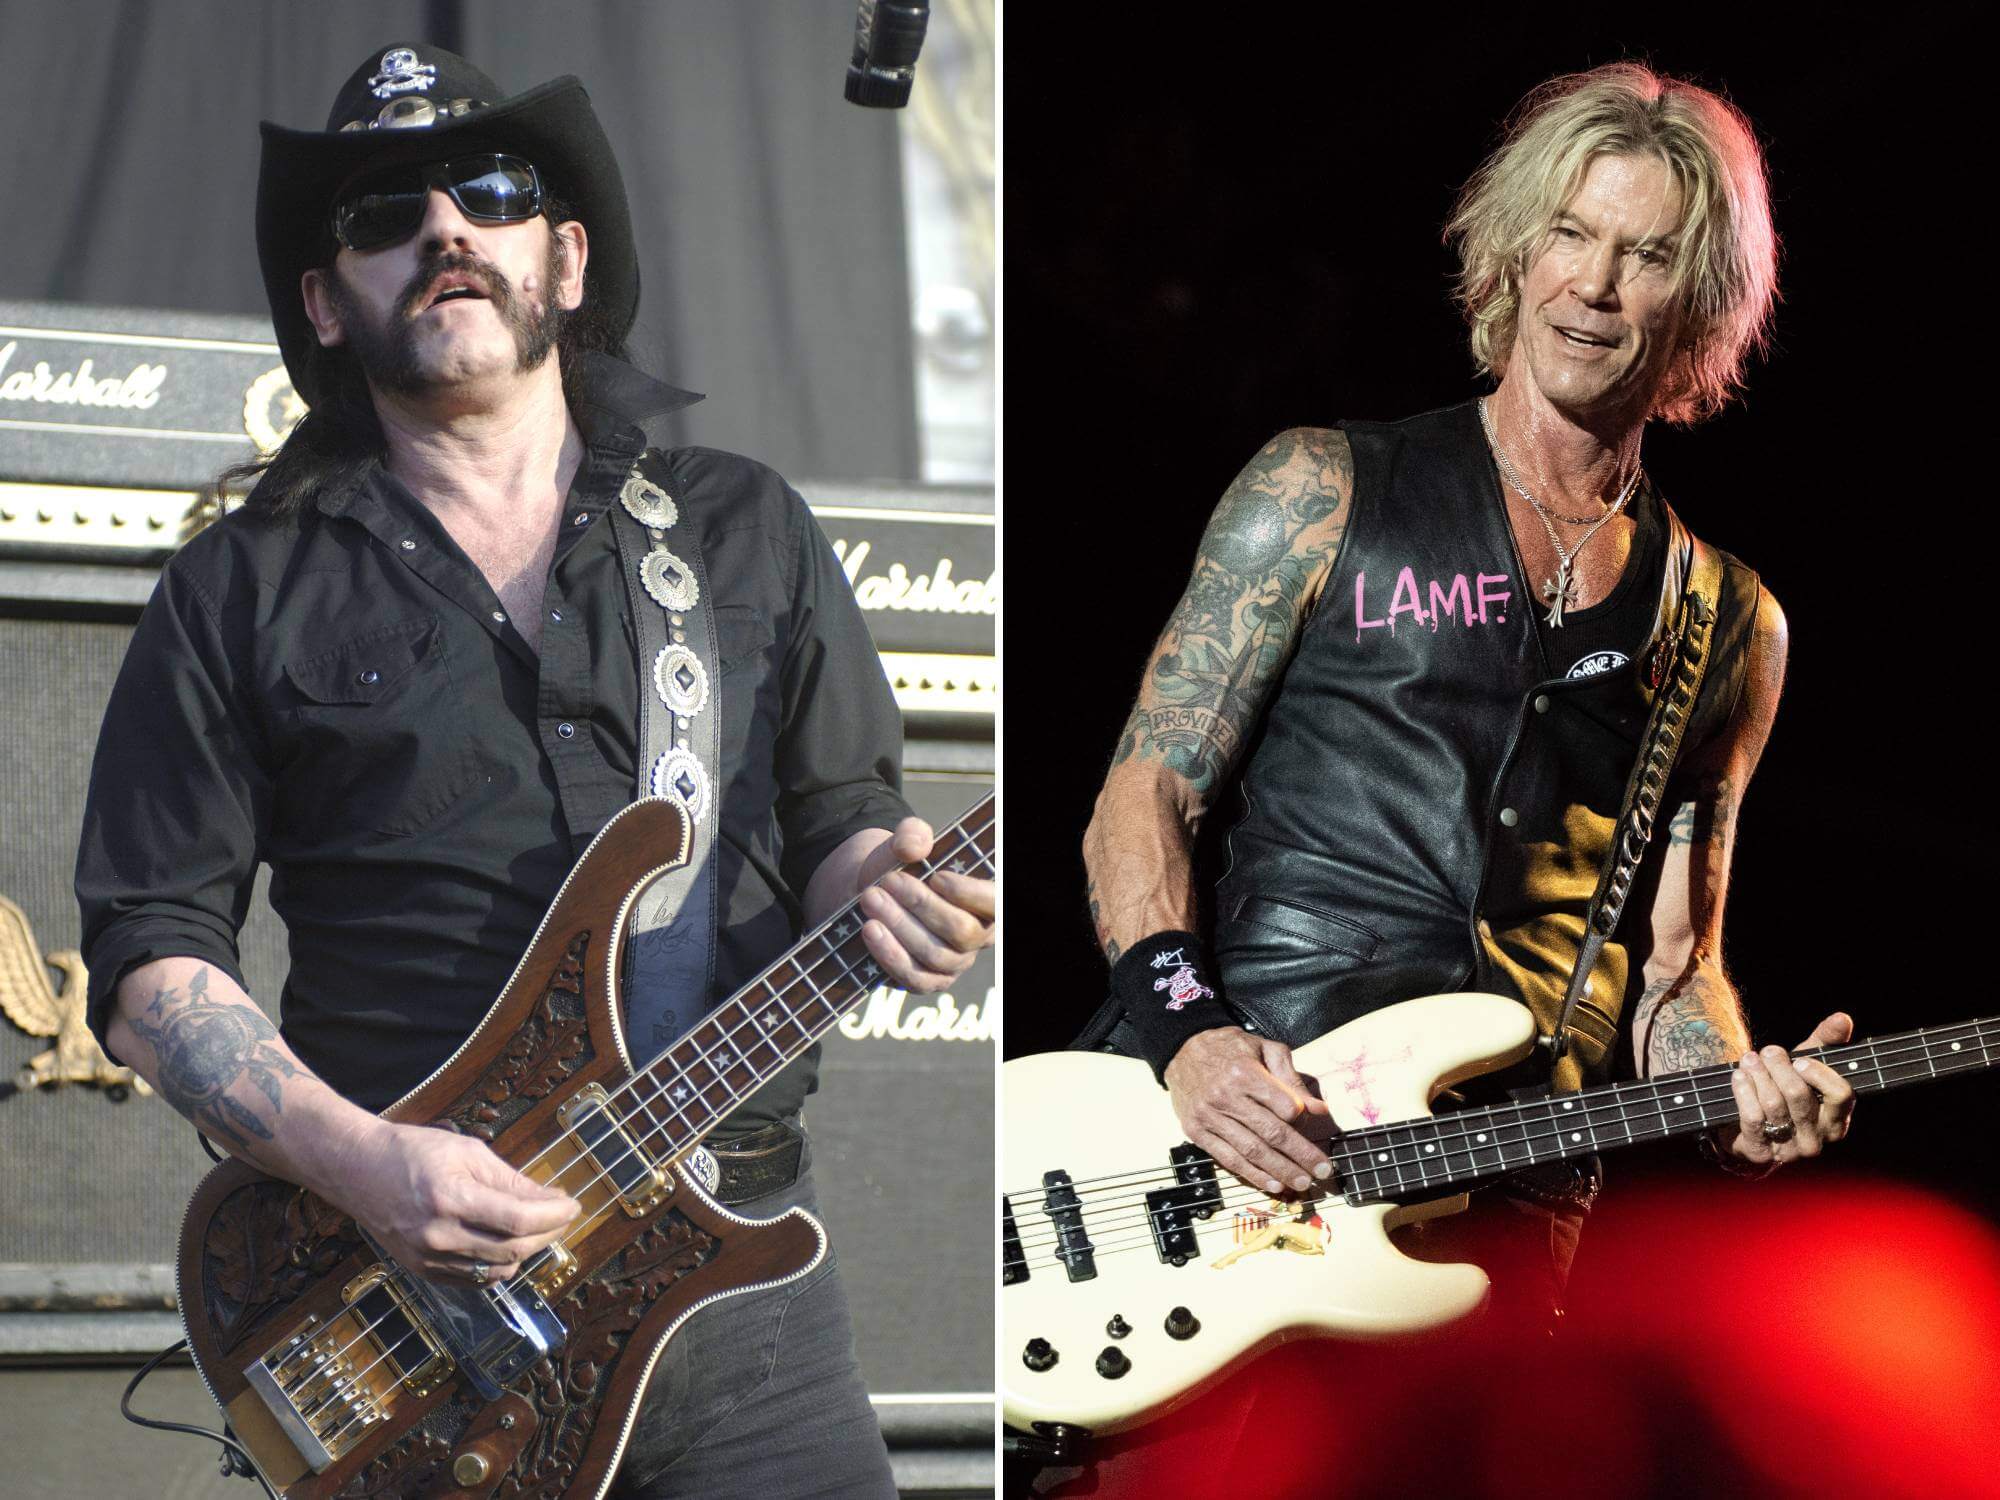 Lemmy and Duff McKagan from Guns N' Roses